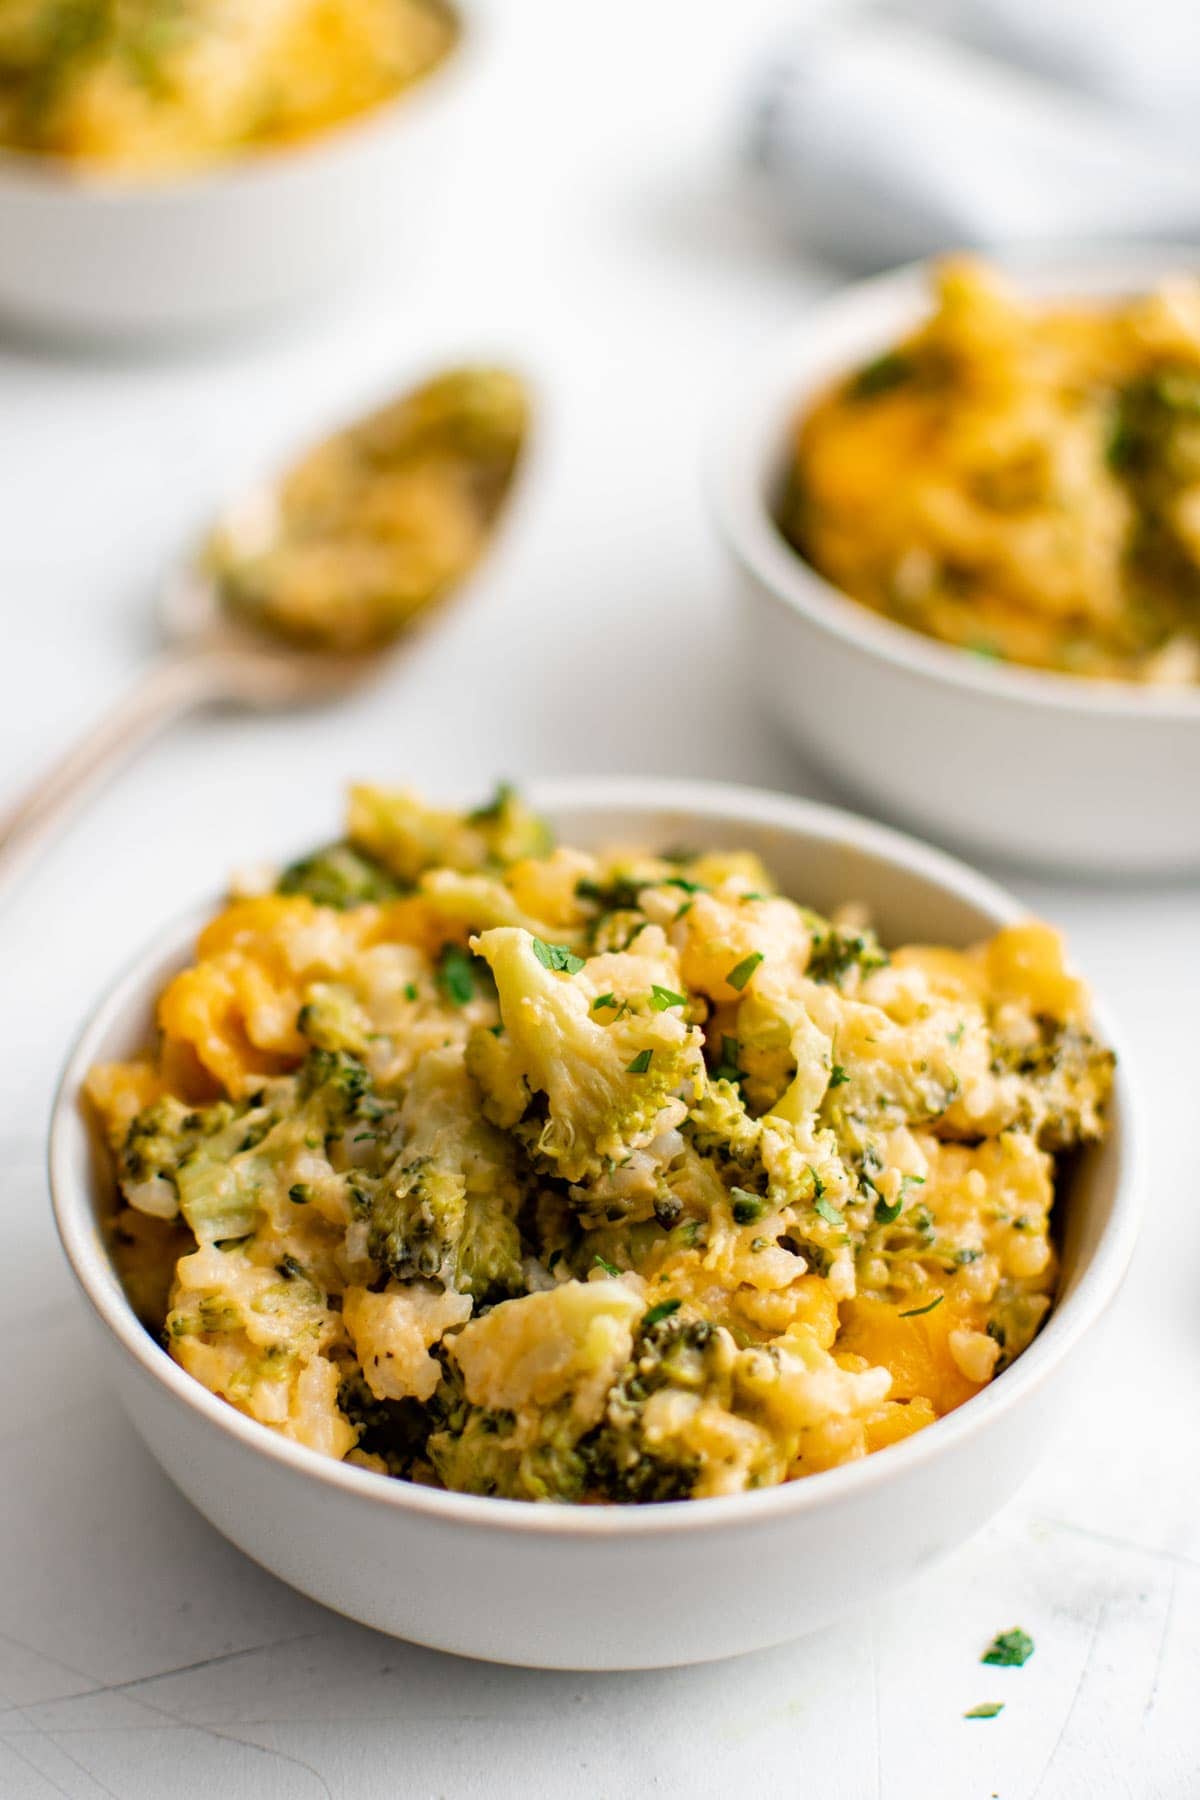 unbaked rice and broccoli casserole with shredded cheese